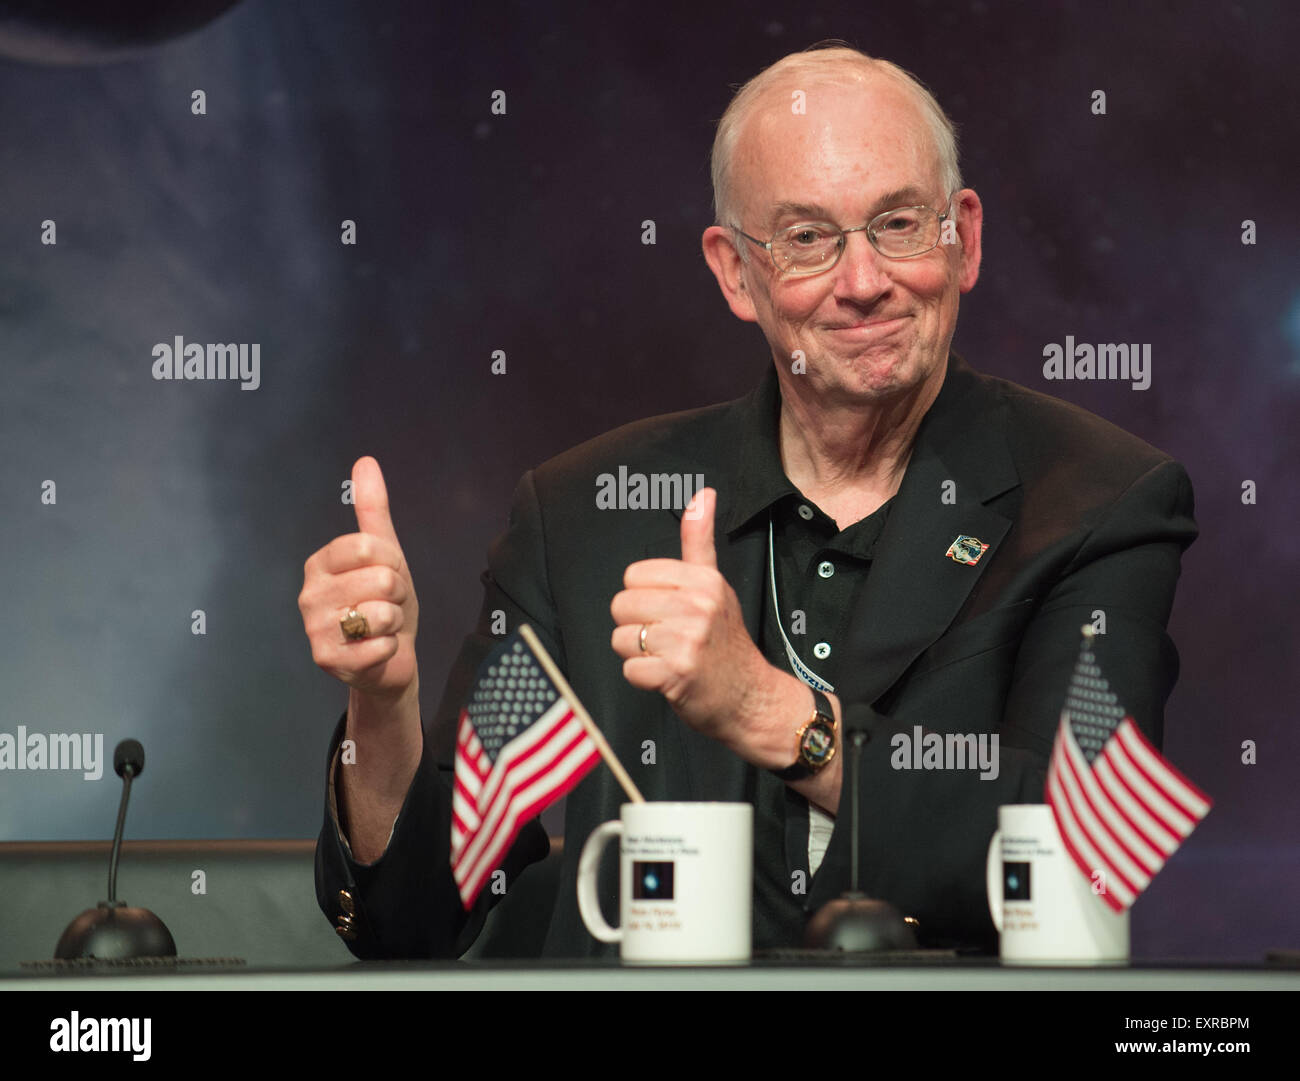 New Horizons Project Manager Glen Fountain of APL during a briefing after the team received confirmation from the spacecraft that it has completed the flyby of Pluto at Johns Hopkins University Applied Physics Laboratory July 14, 2015 in Laurel, Maryland. Stock Photo